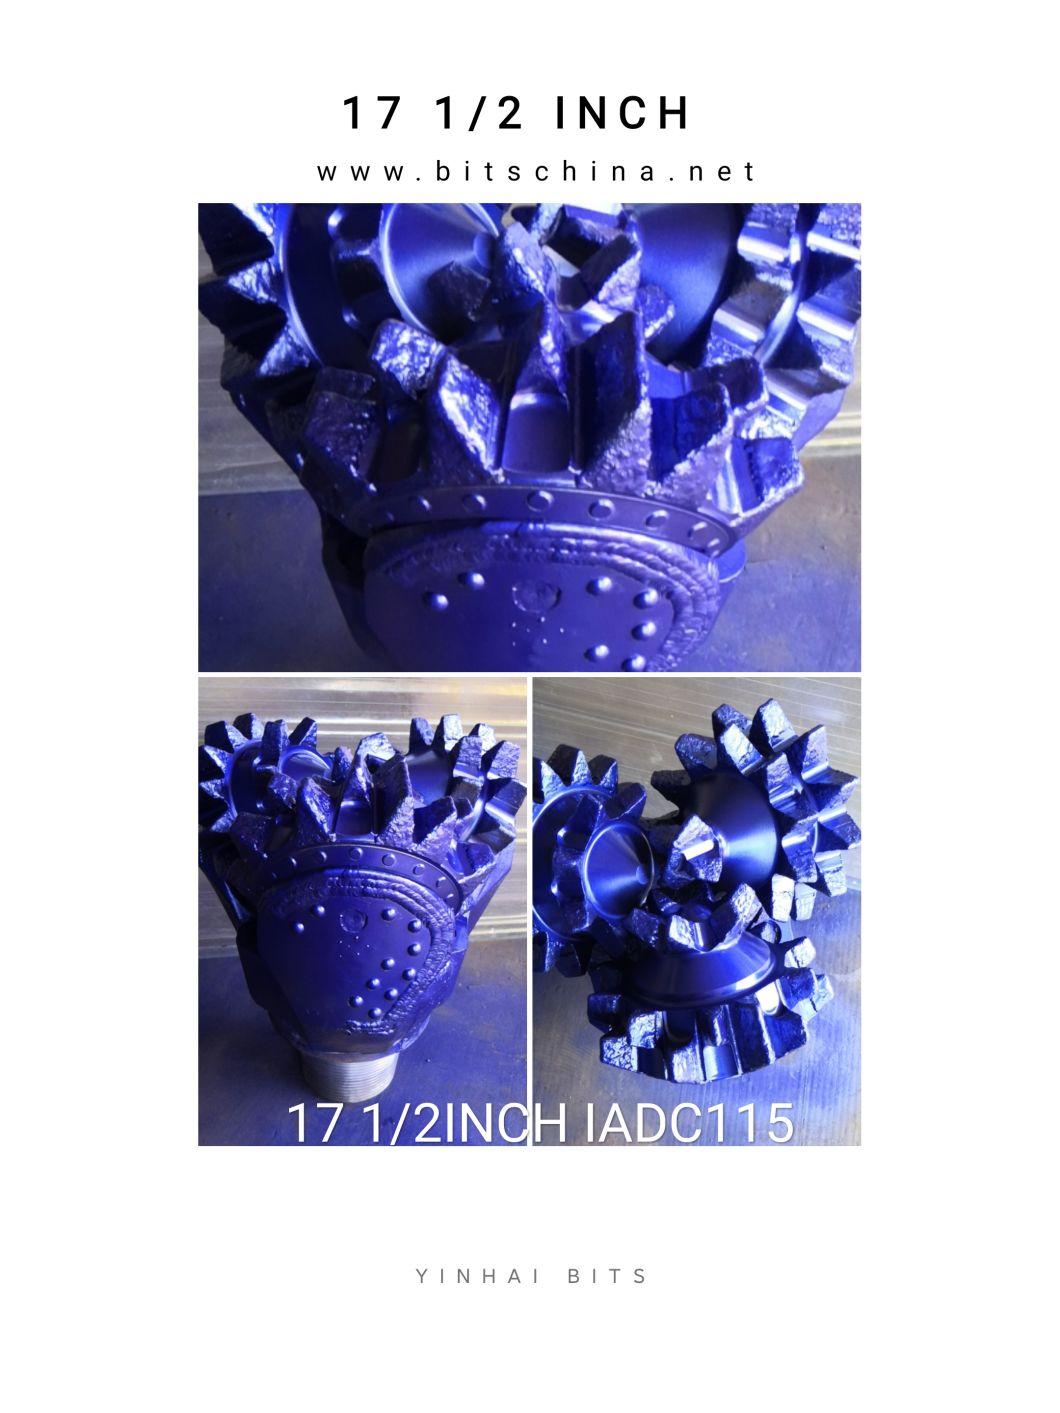 444.5mm 17 1/2 Inch IADC115/215 Milled Tooth Bit for Water Well Drilling